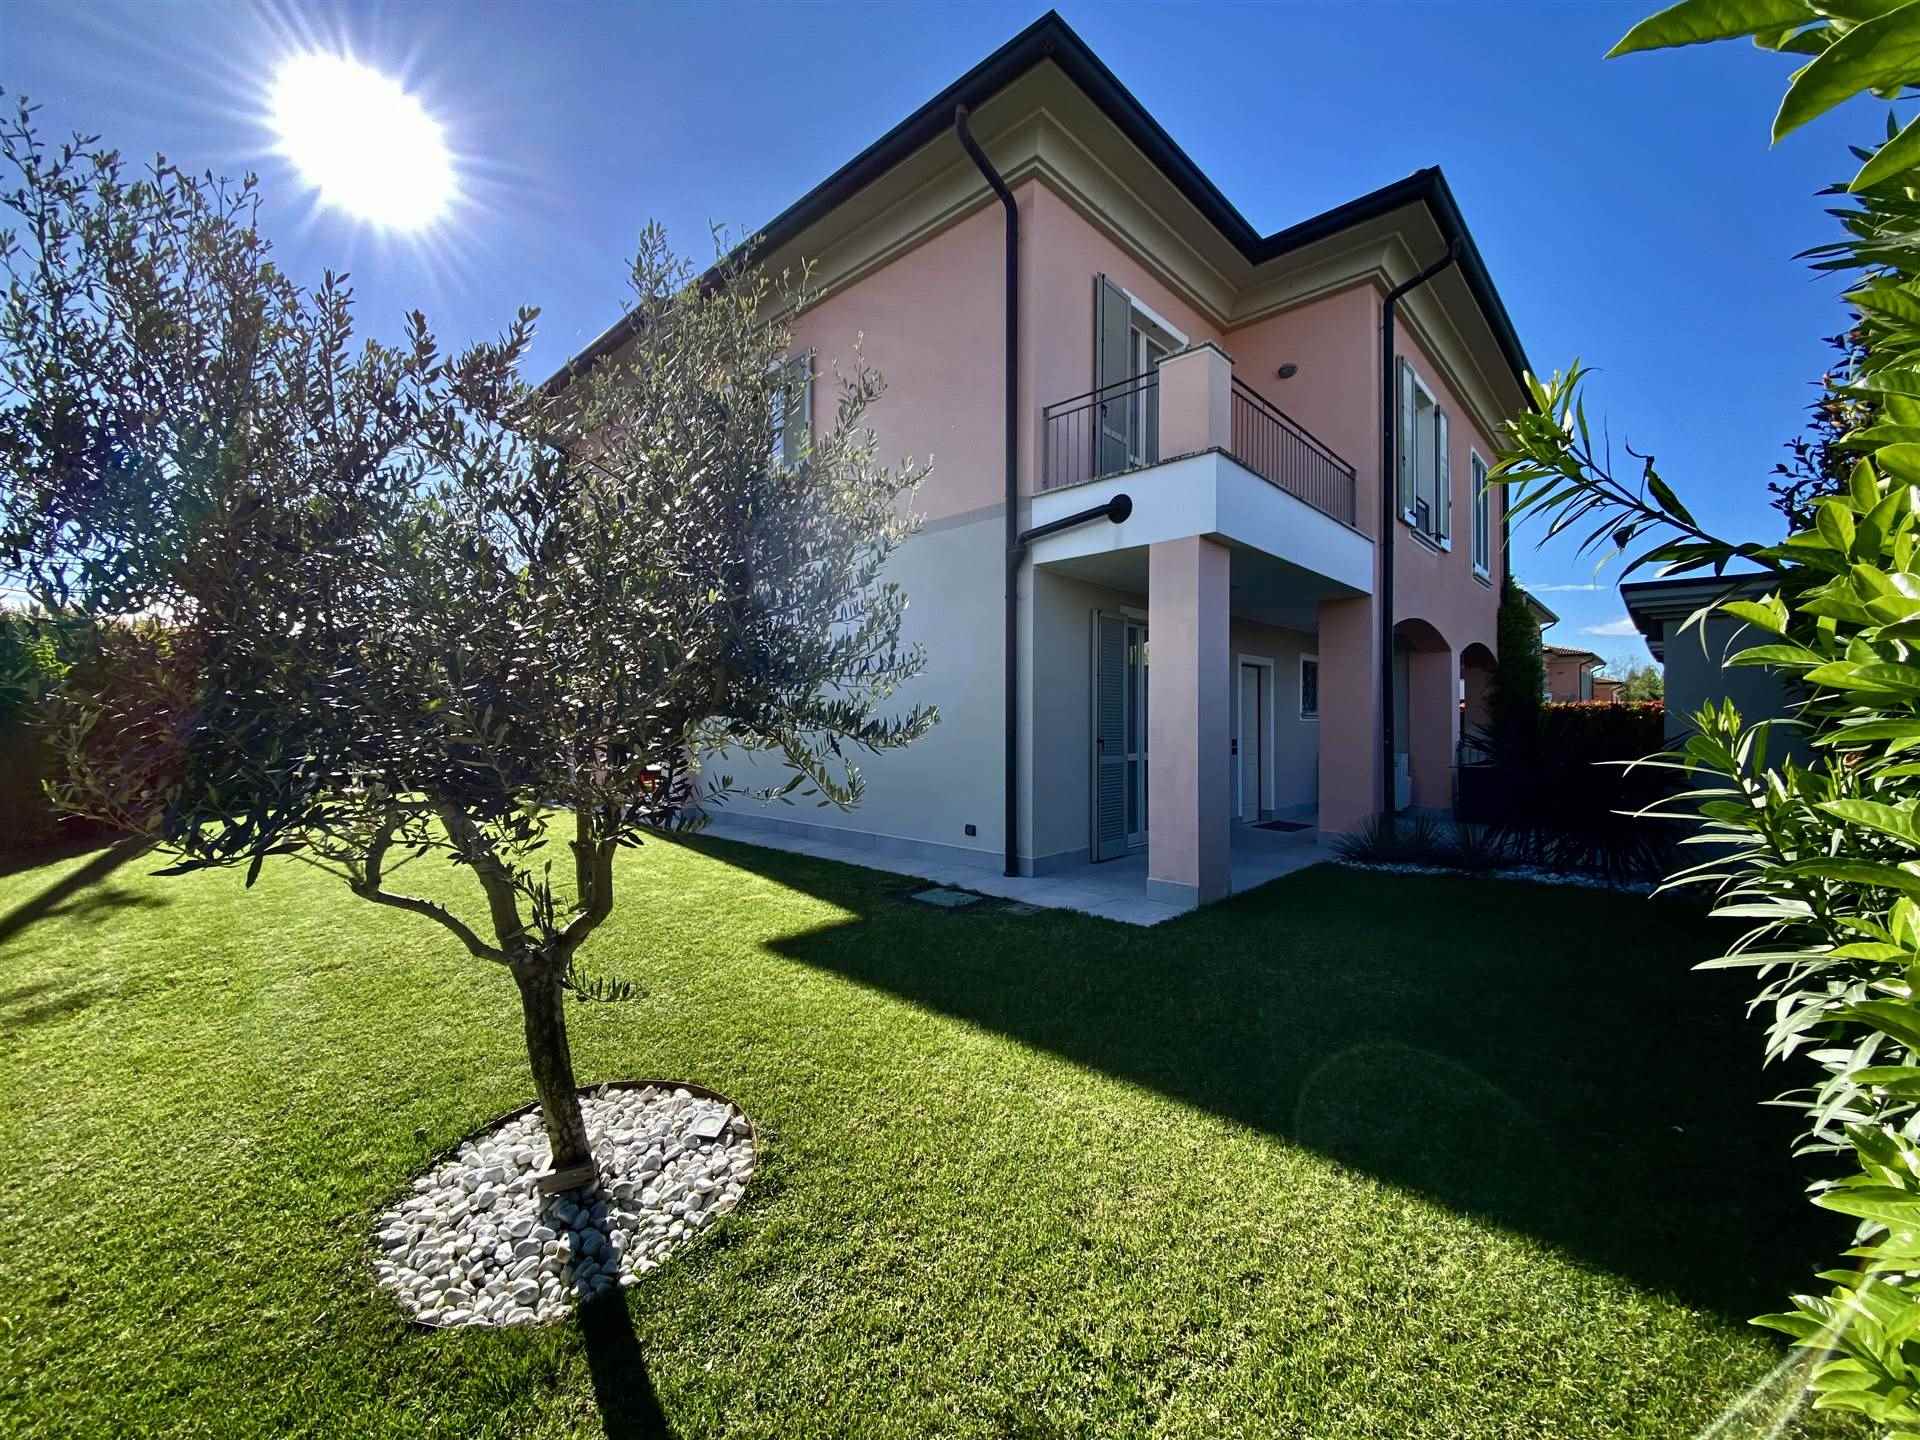 CROCIALE, MANERBA DEL GARDA, Duplex villa for sale of 130 Sq. mt., Excellent Condition, Heating Individual heating system, Energetic class: D, placed at Ground, composed by: 4 Rooms, Separate kitchen,